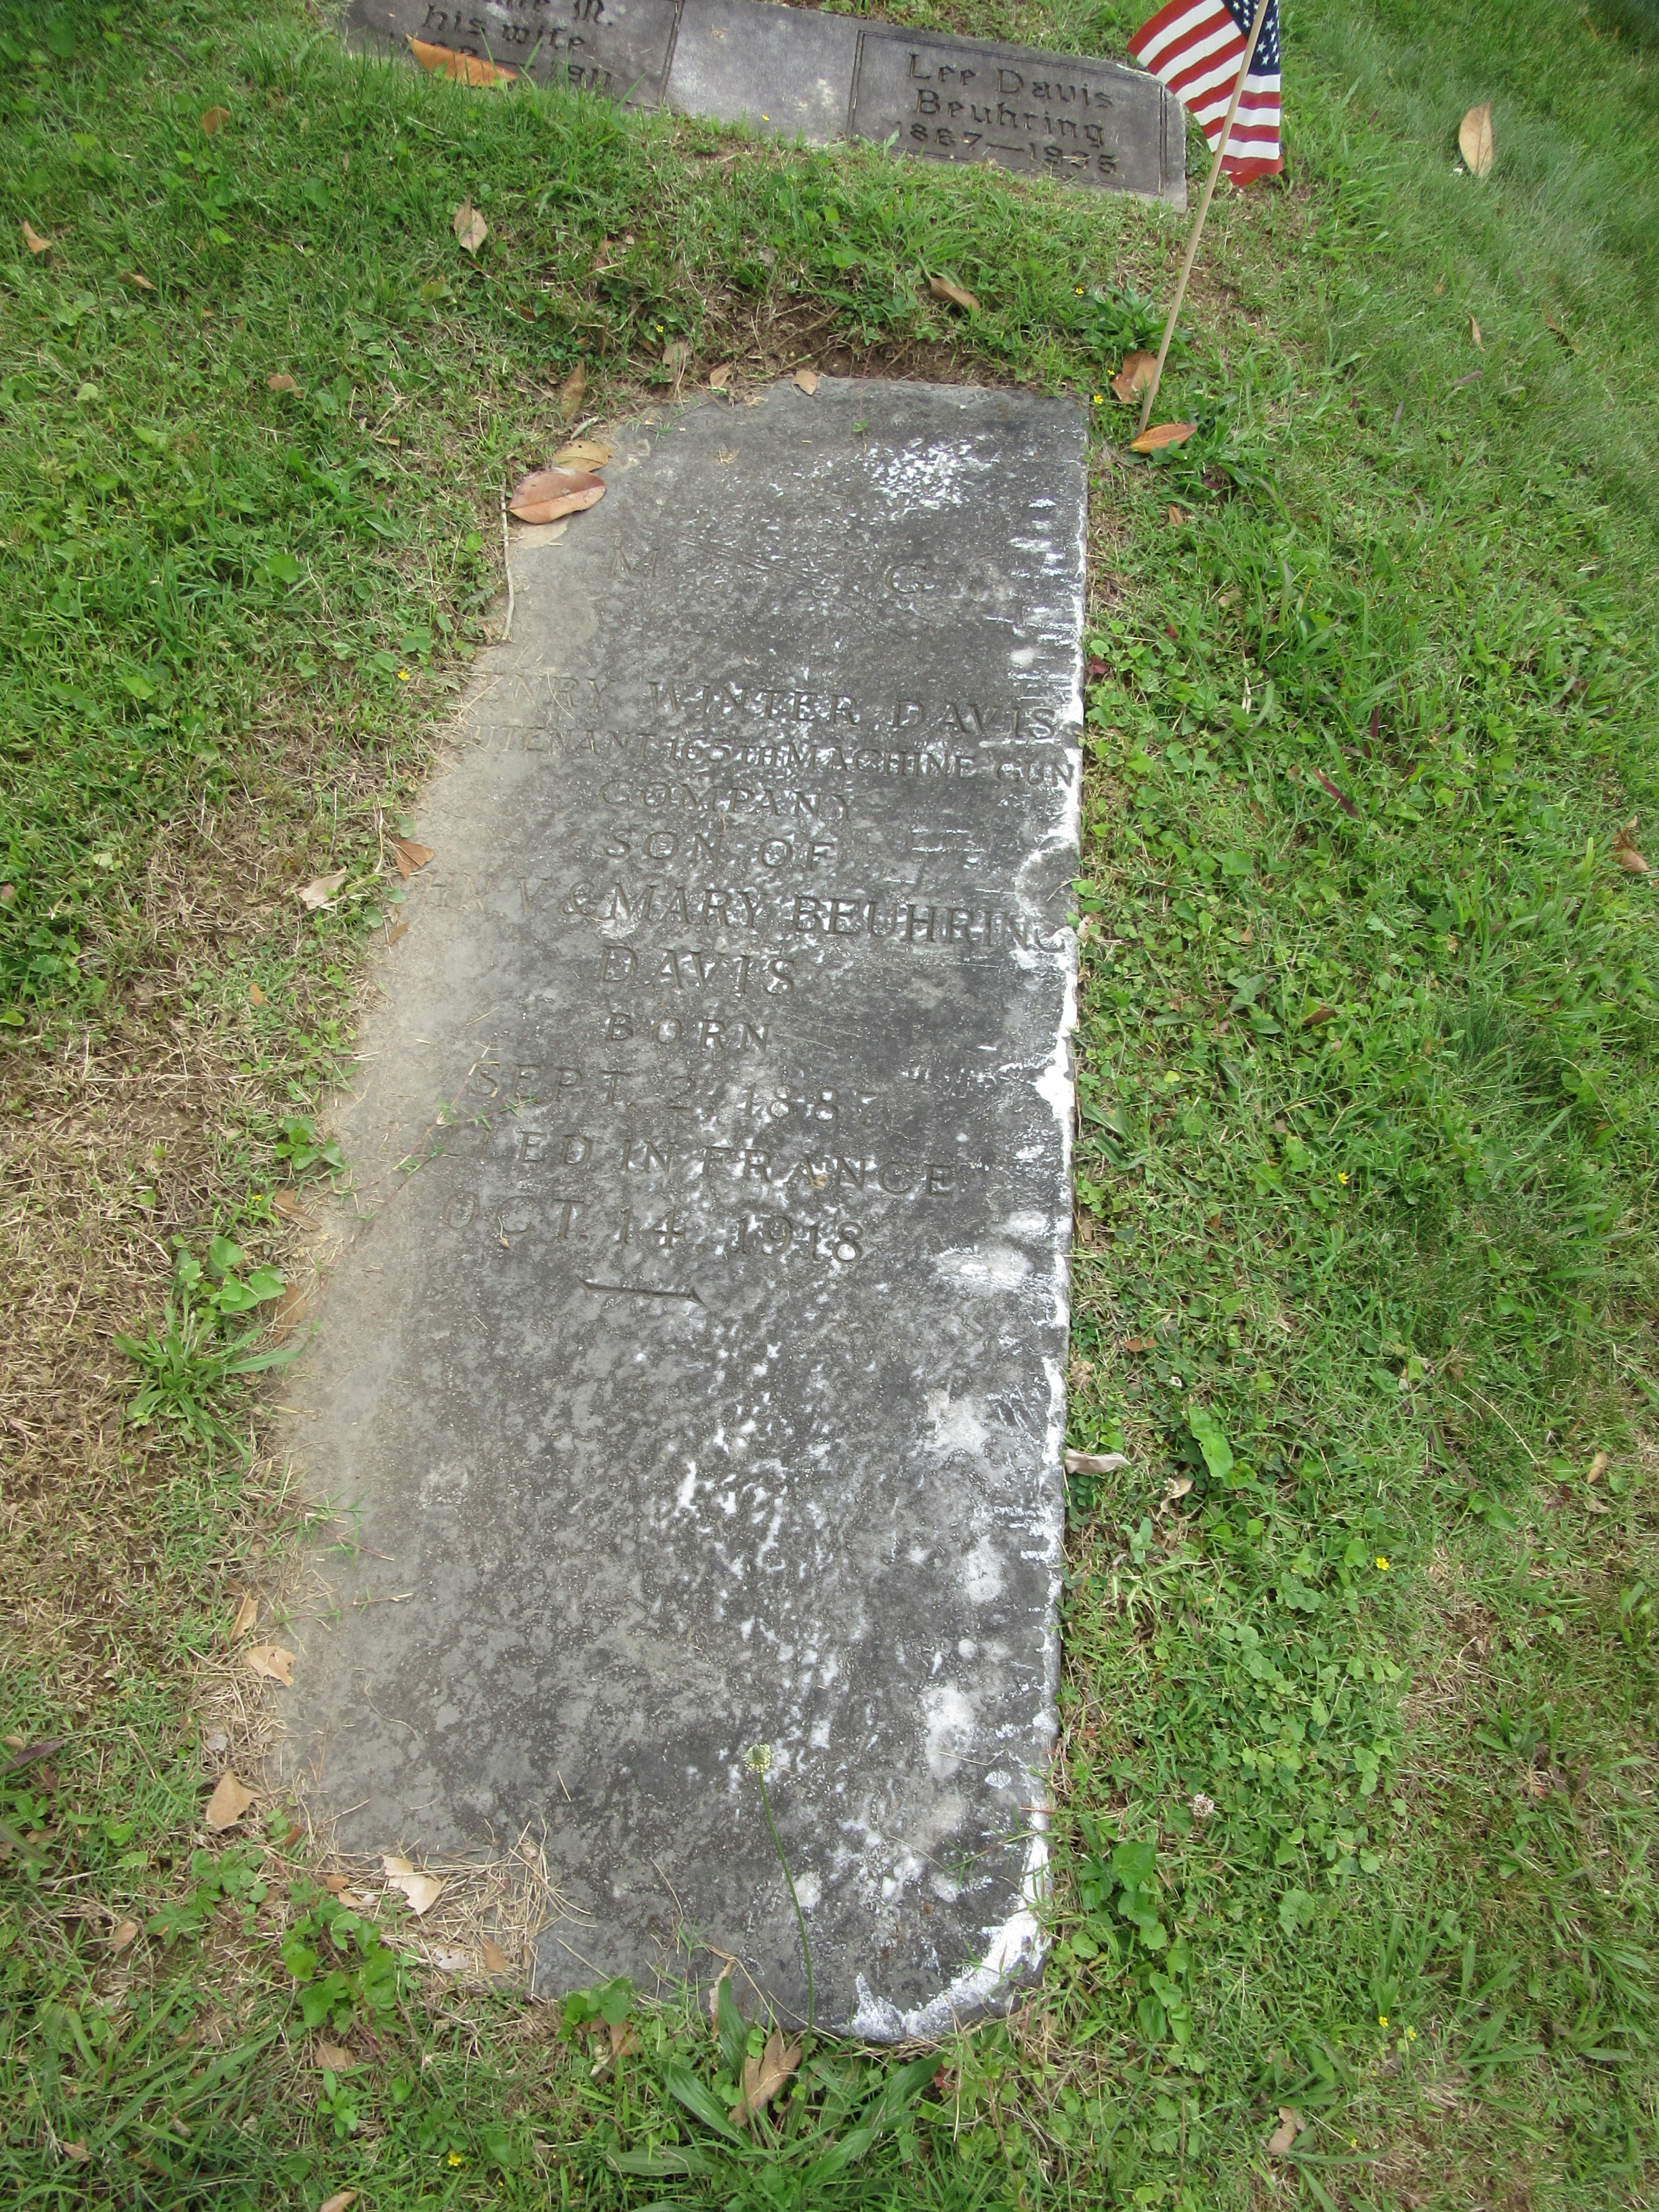 Headstone at Spring Hill Cemetery